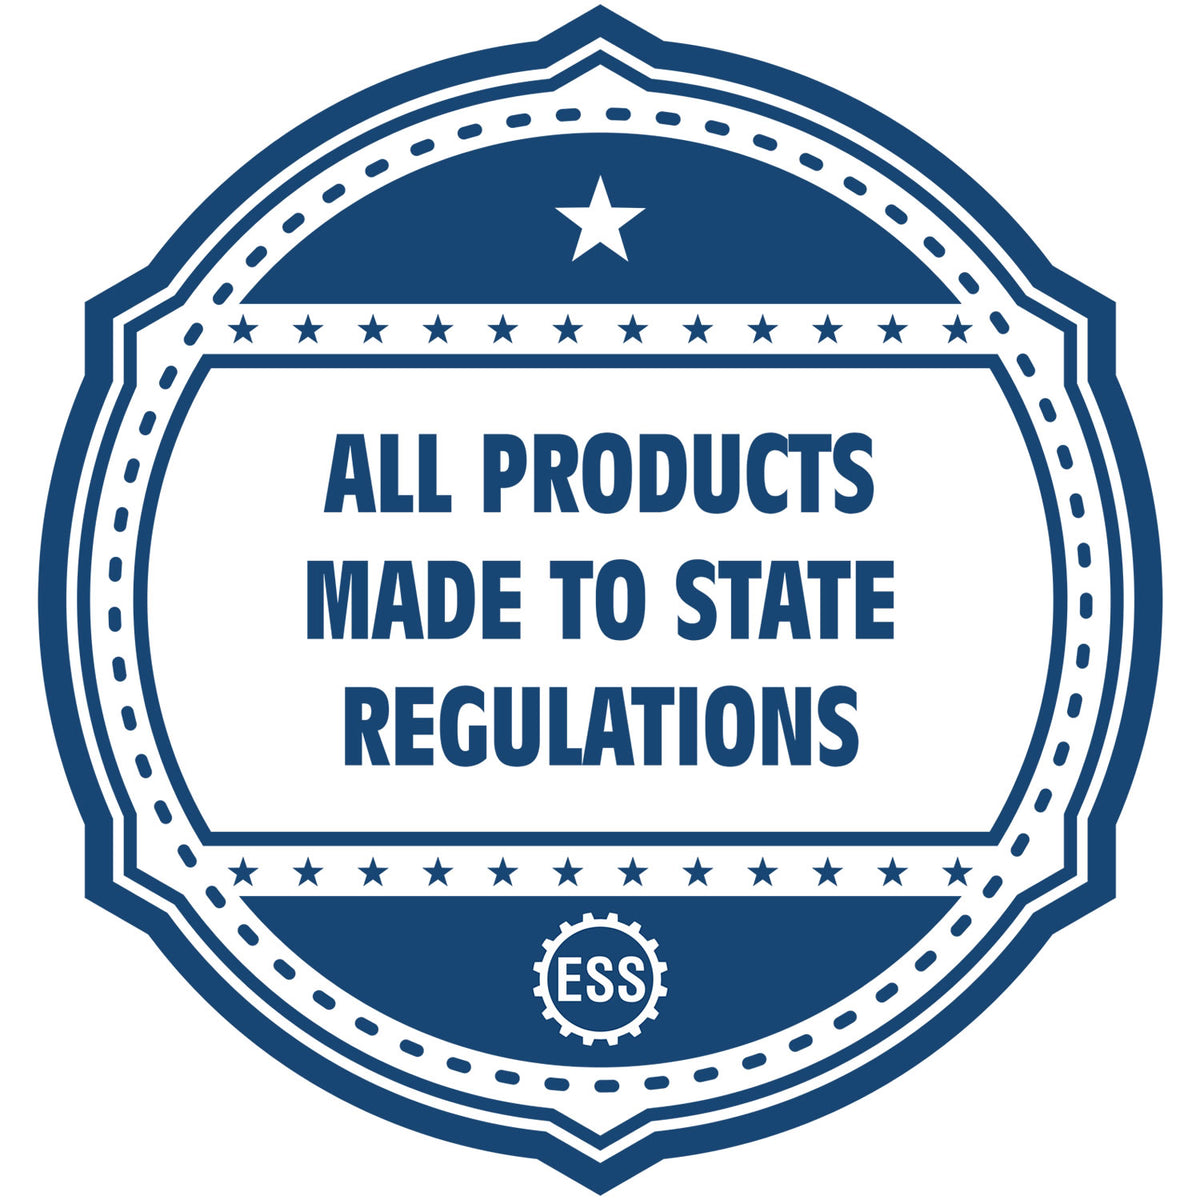 An icon or badge element for the Handheld Illinois Professional Engineer Embosser showing that this product is made in compliance with state regulations.